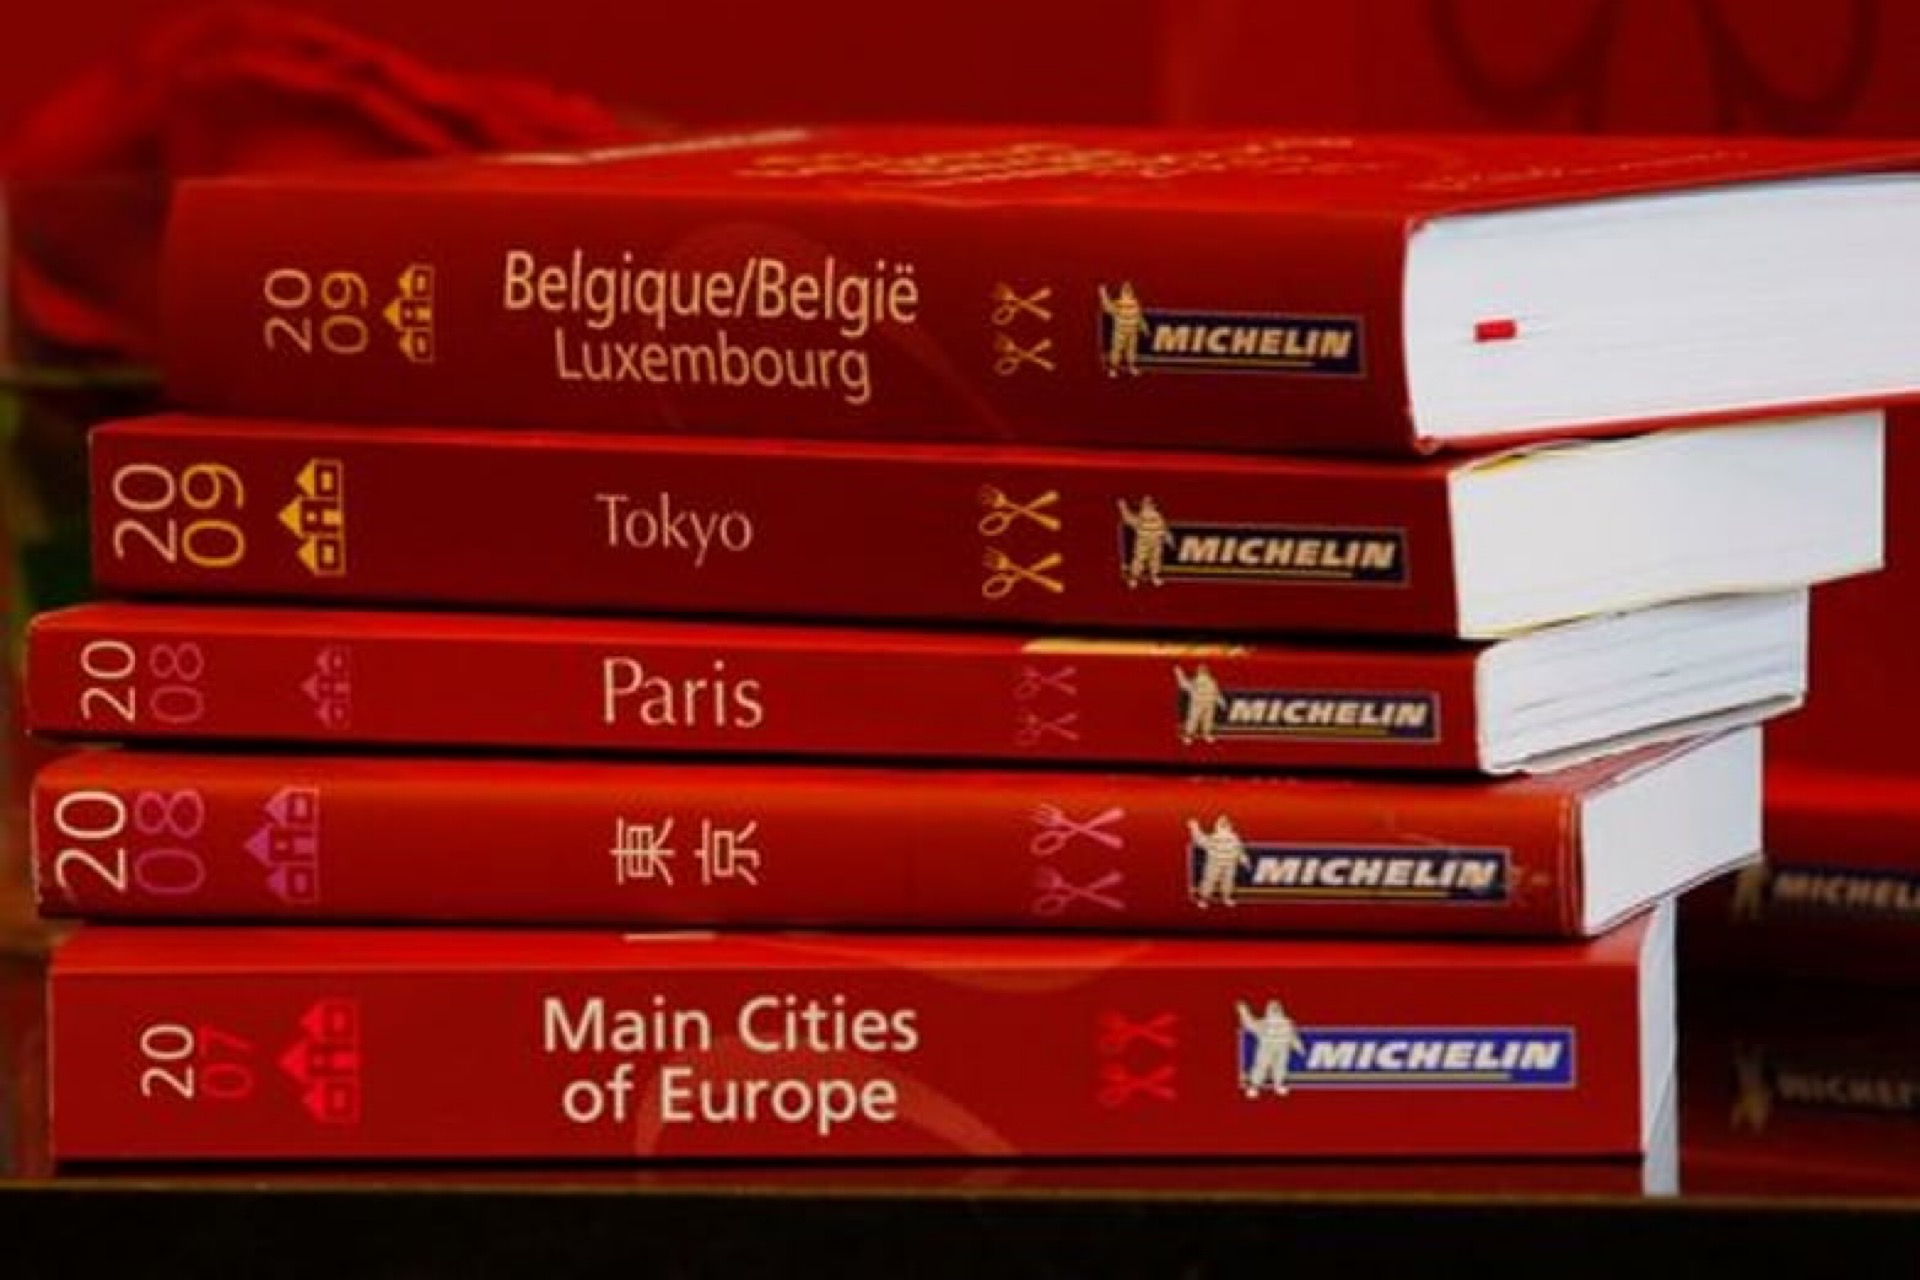 Michelin Guide history: How did a tire company become an elite restaurant rating guide?